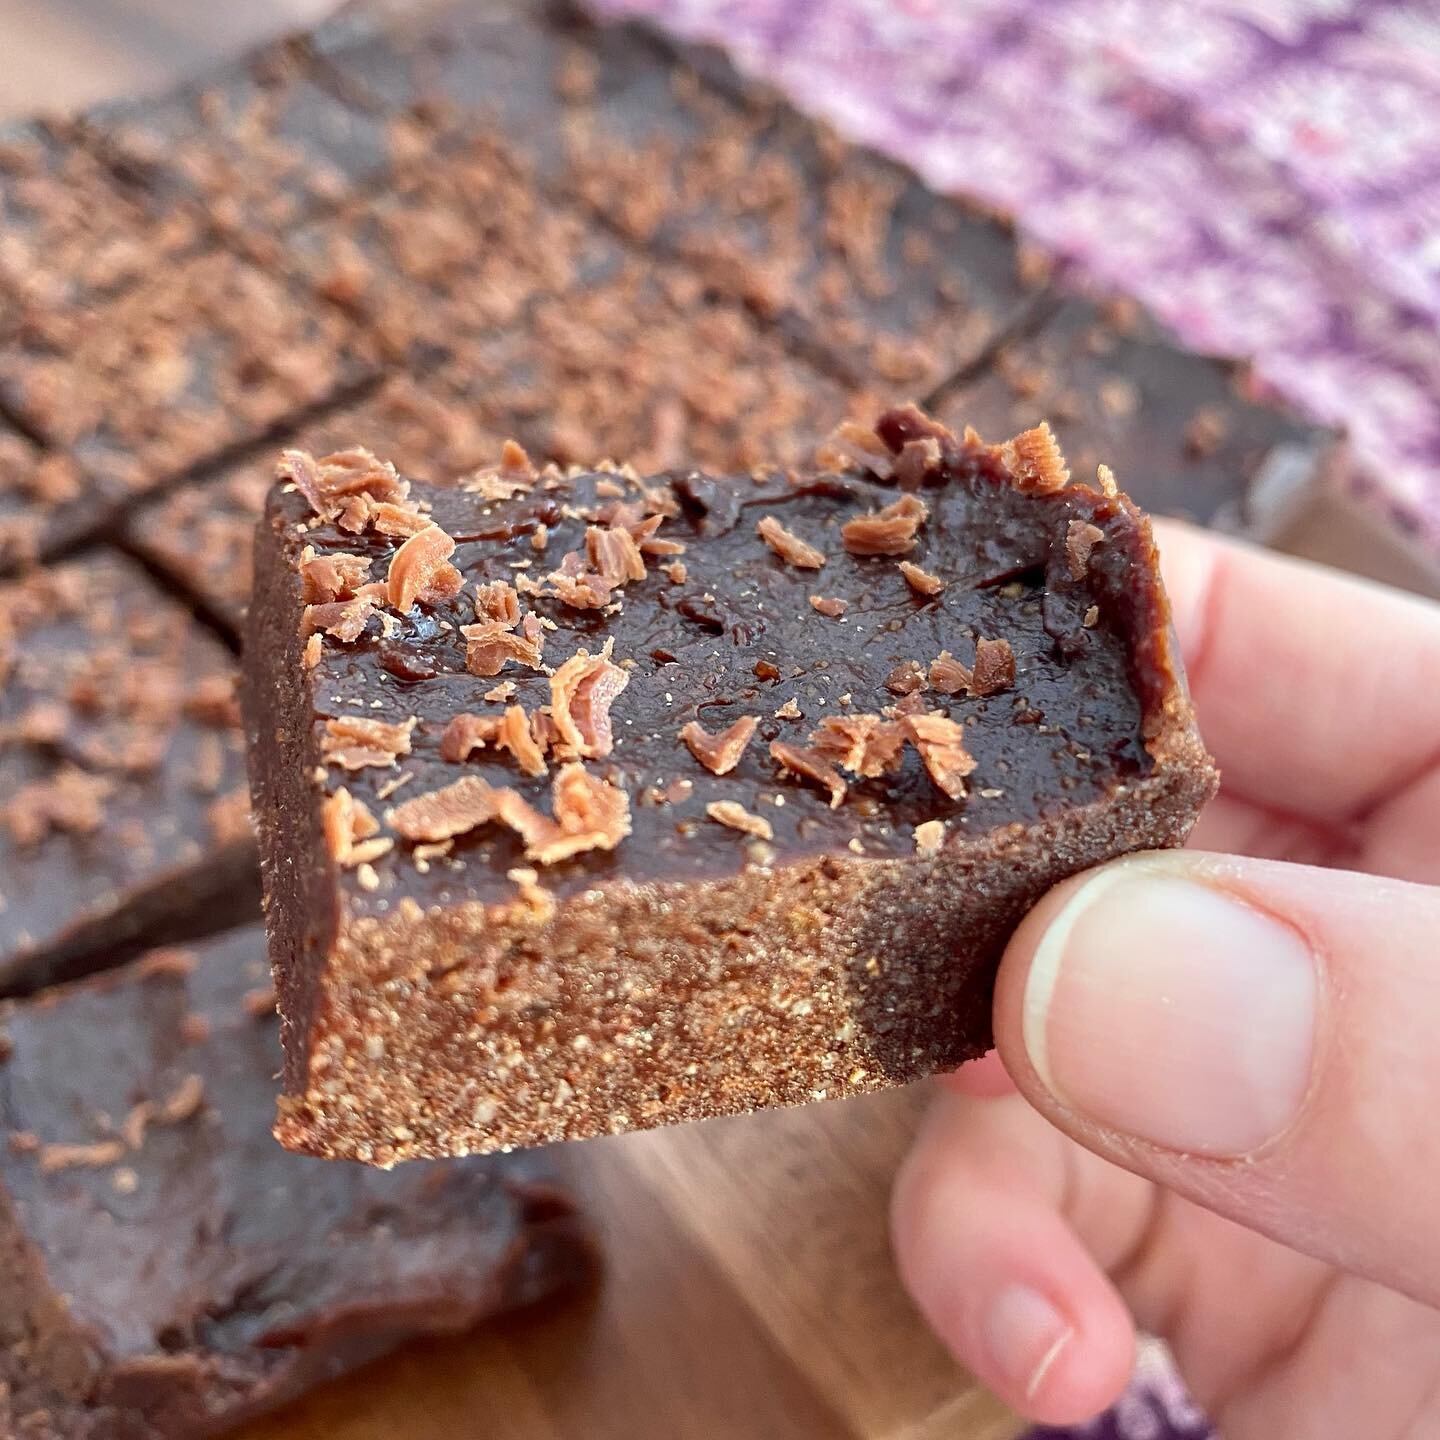 Raw Hazelnut(Ella) Brownies

I love any &lsquo;raw&rsquo; baking recipes as they are so easy to make! These little gooey bites will not disappoint you for a special Saturday breakfast treat&hellip;squishy, chocolatey with that classic hazelnut flavou